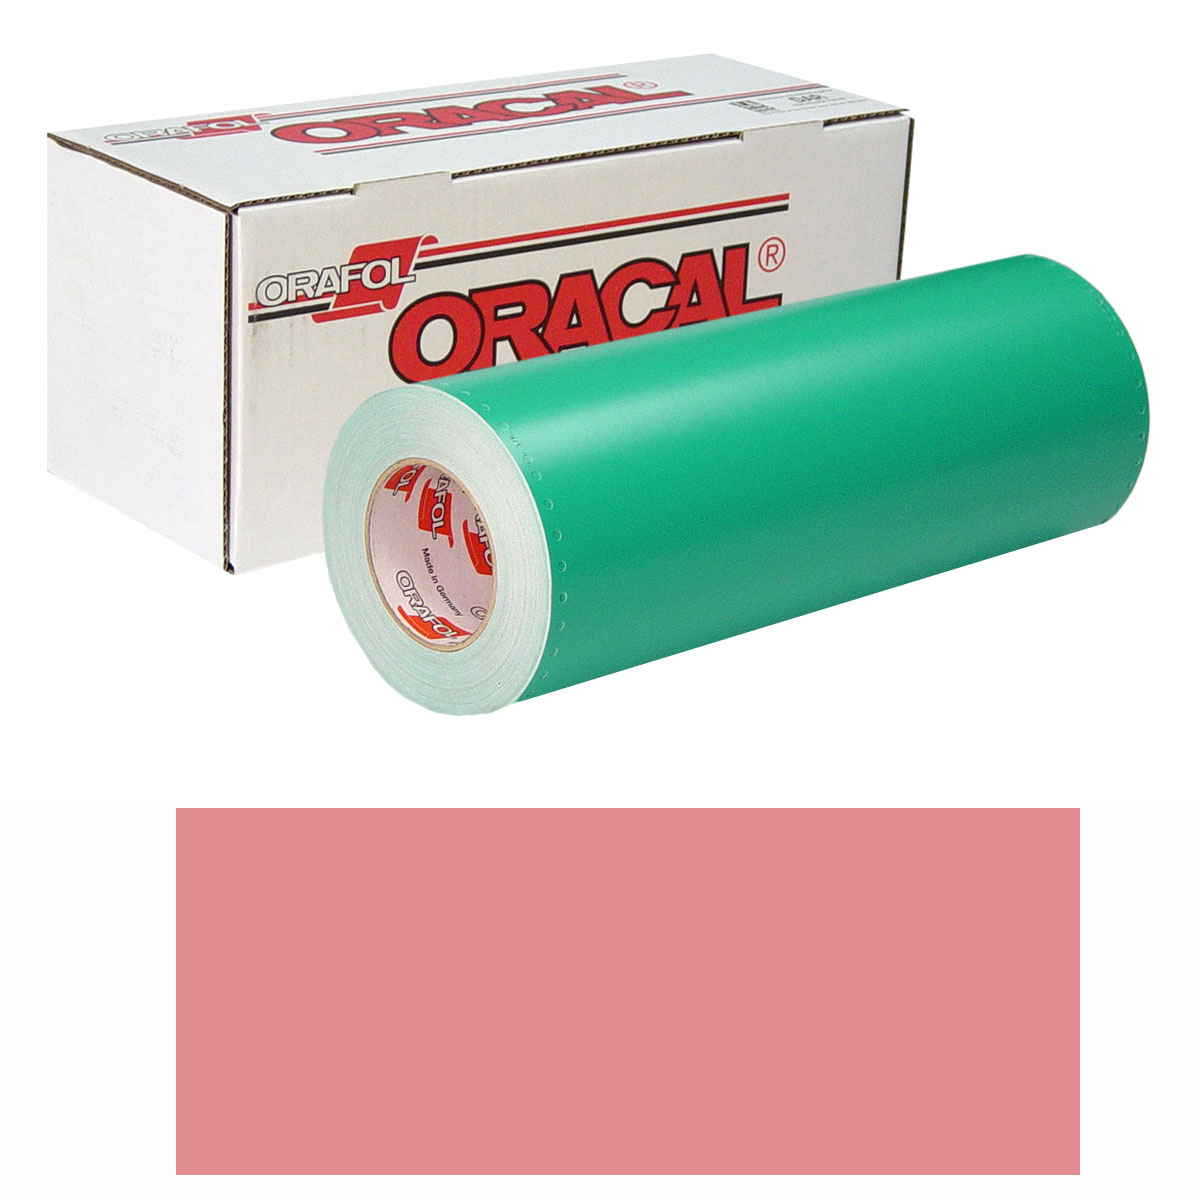 ORACAL 8500 15in X 50yd 085 Pale Pink